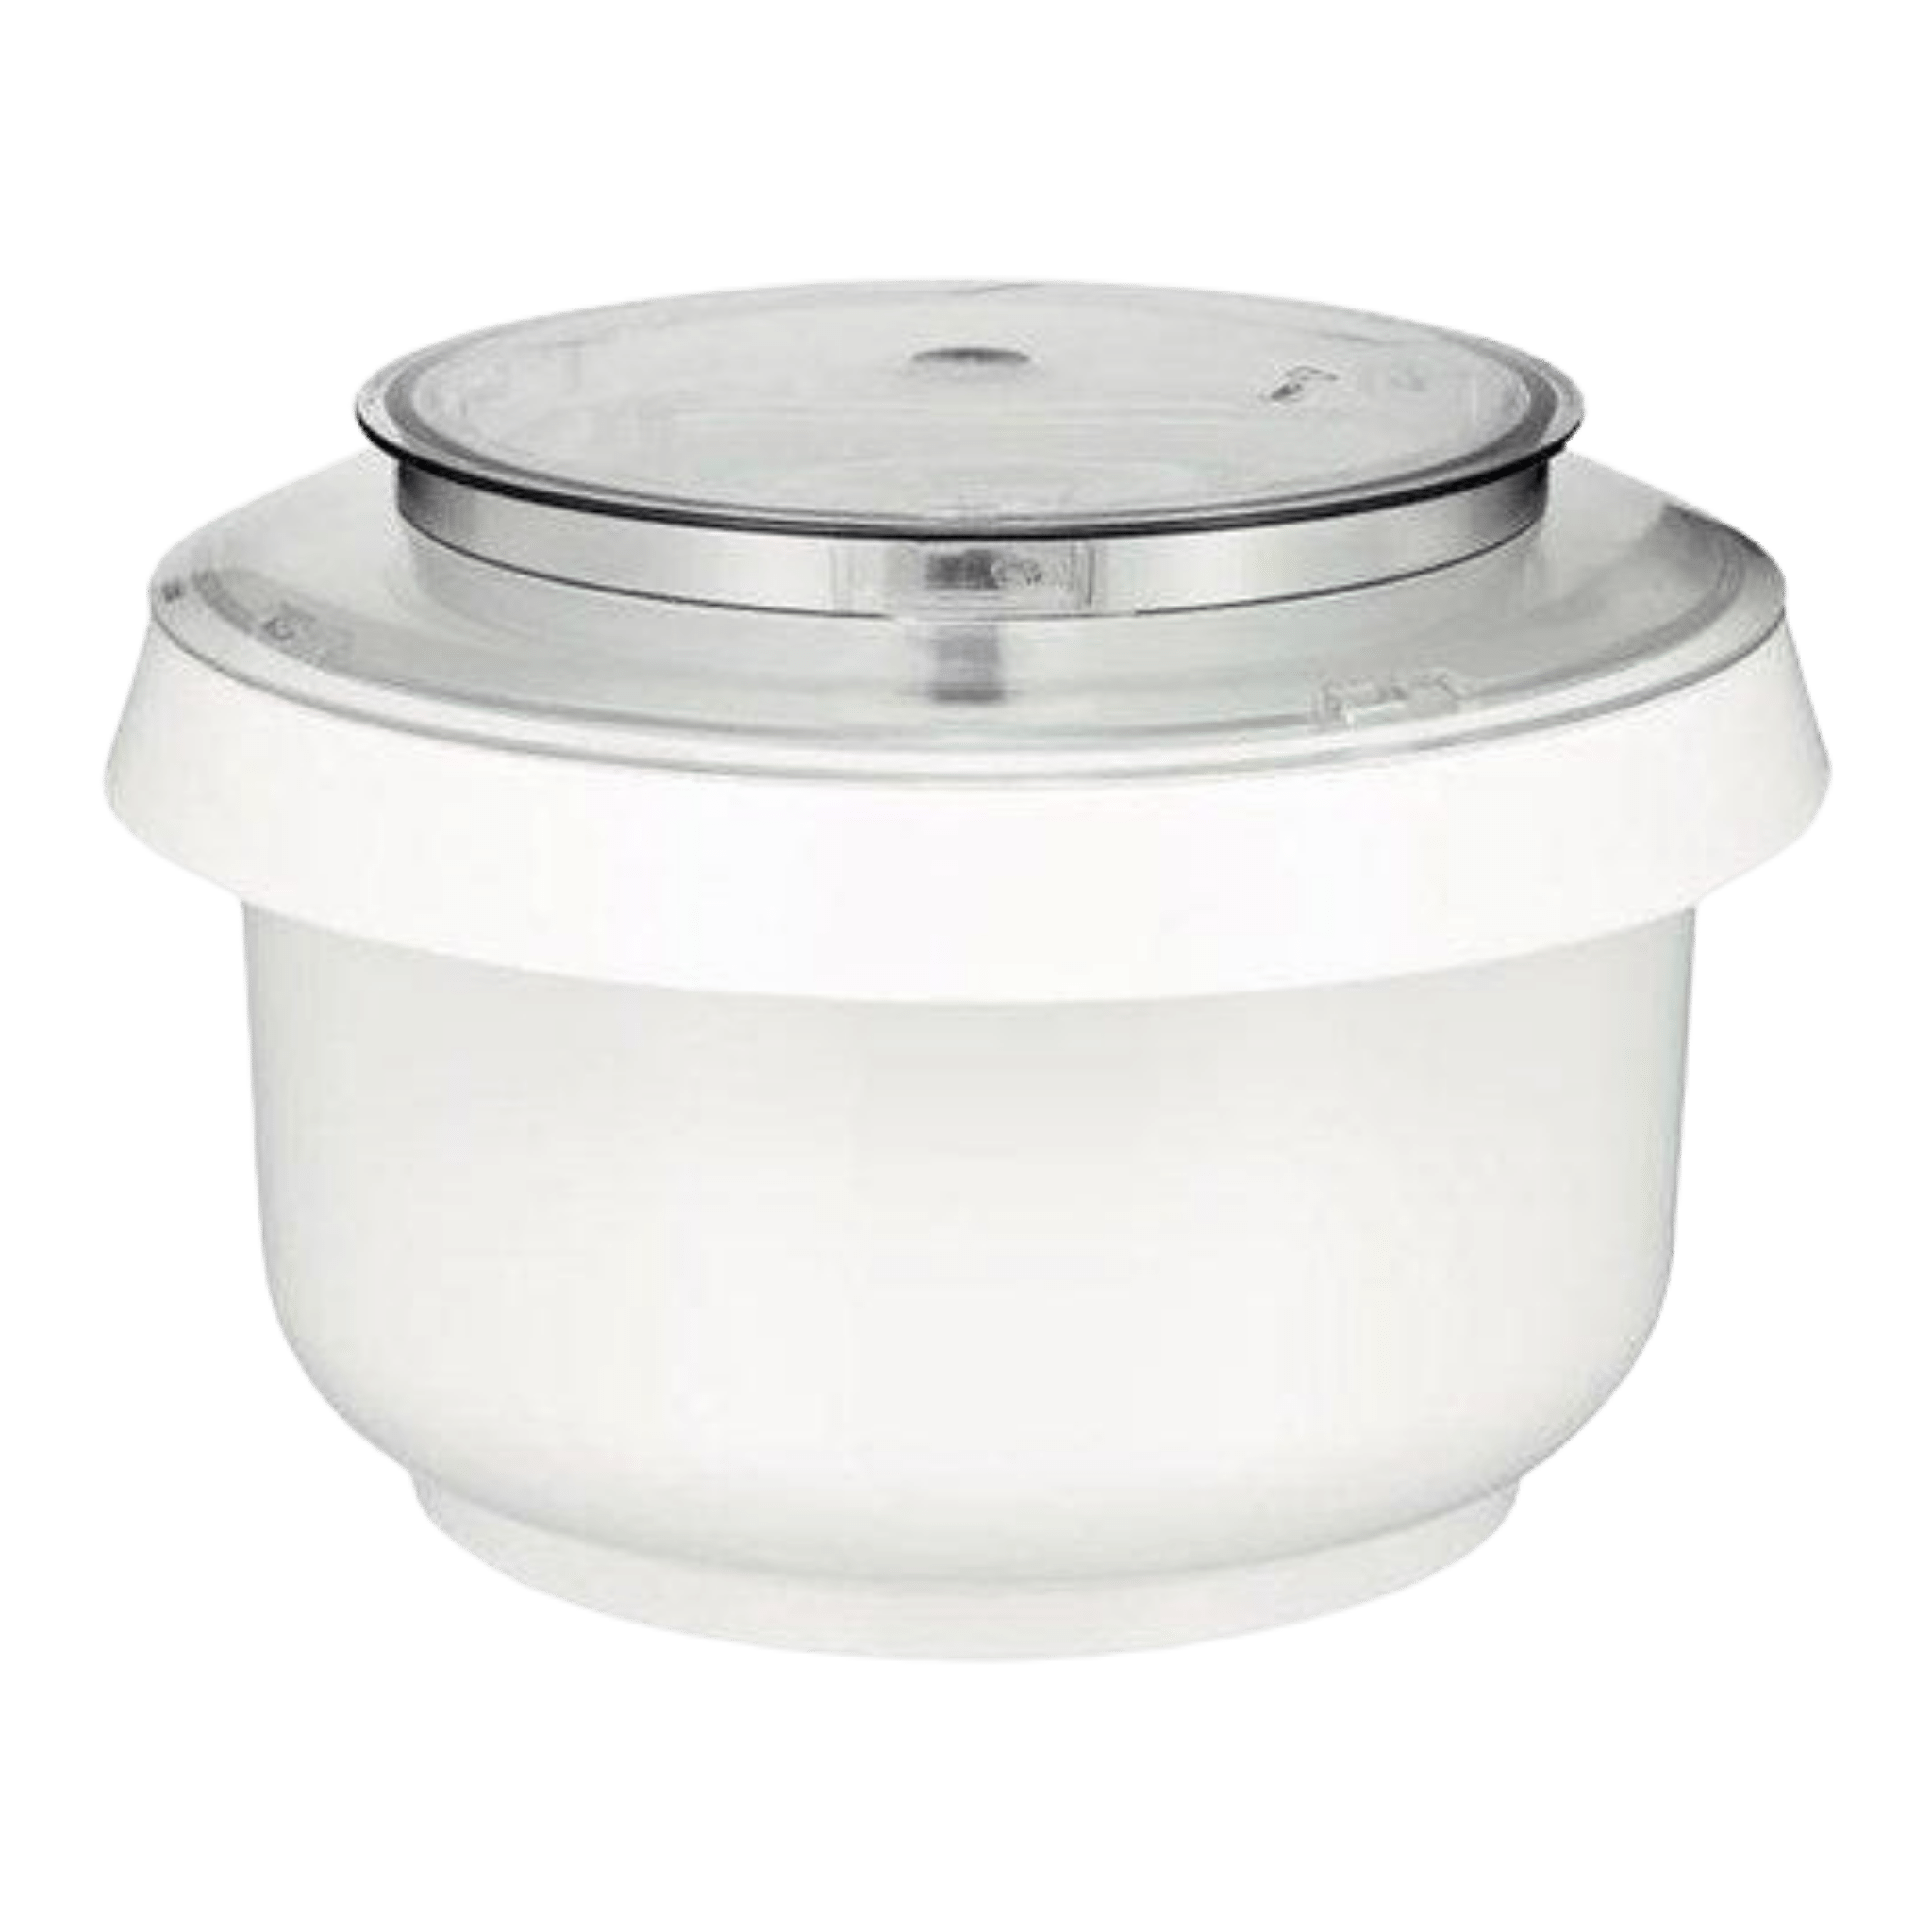 6.5 Quart Mixing Bowl for Bosch Universal Plus Mixer Complete with Lids